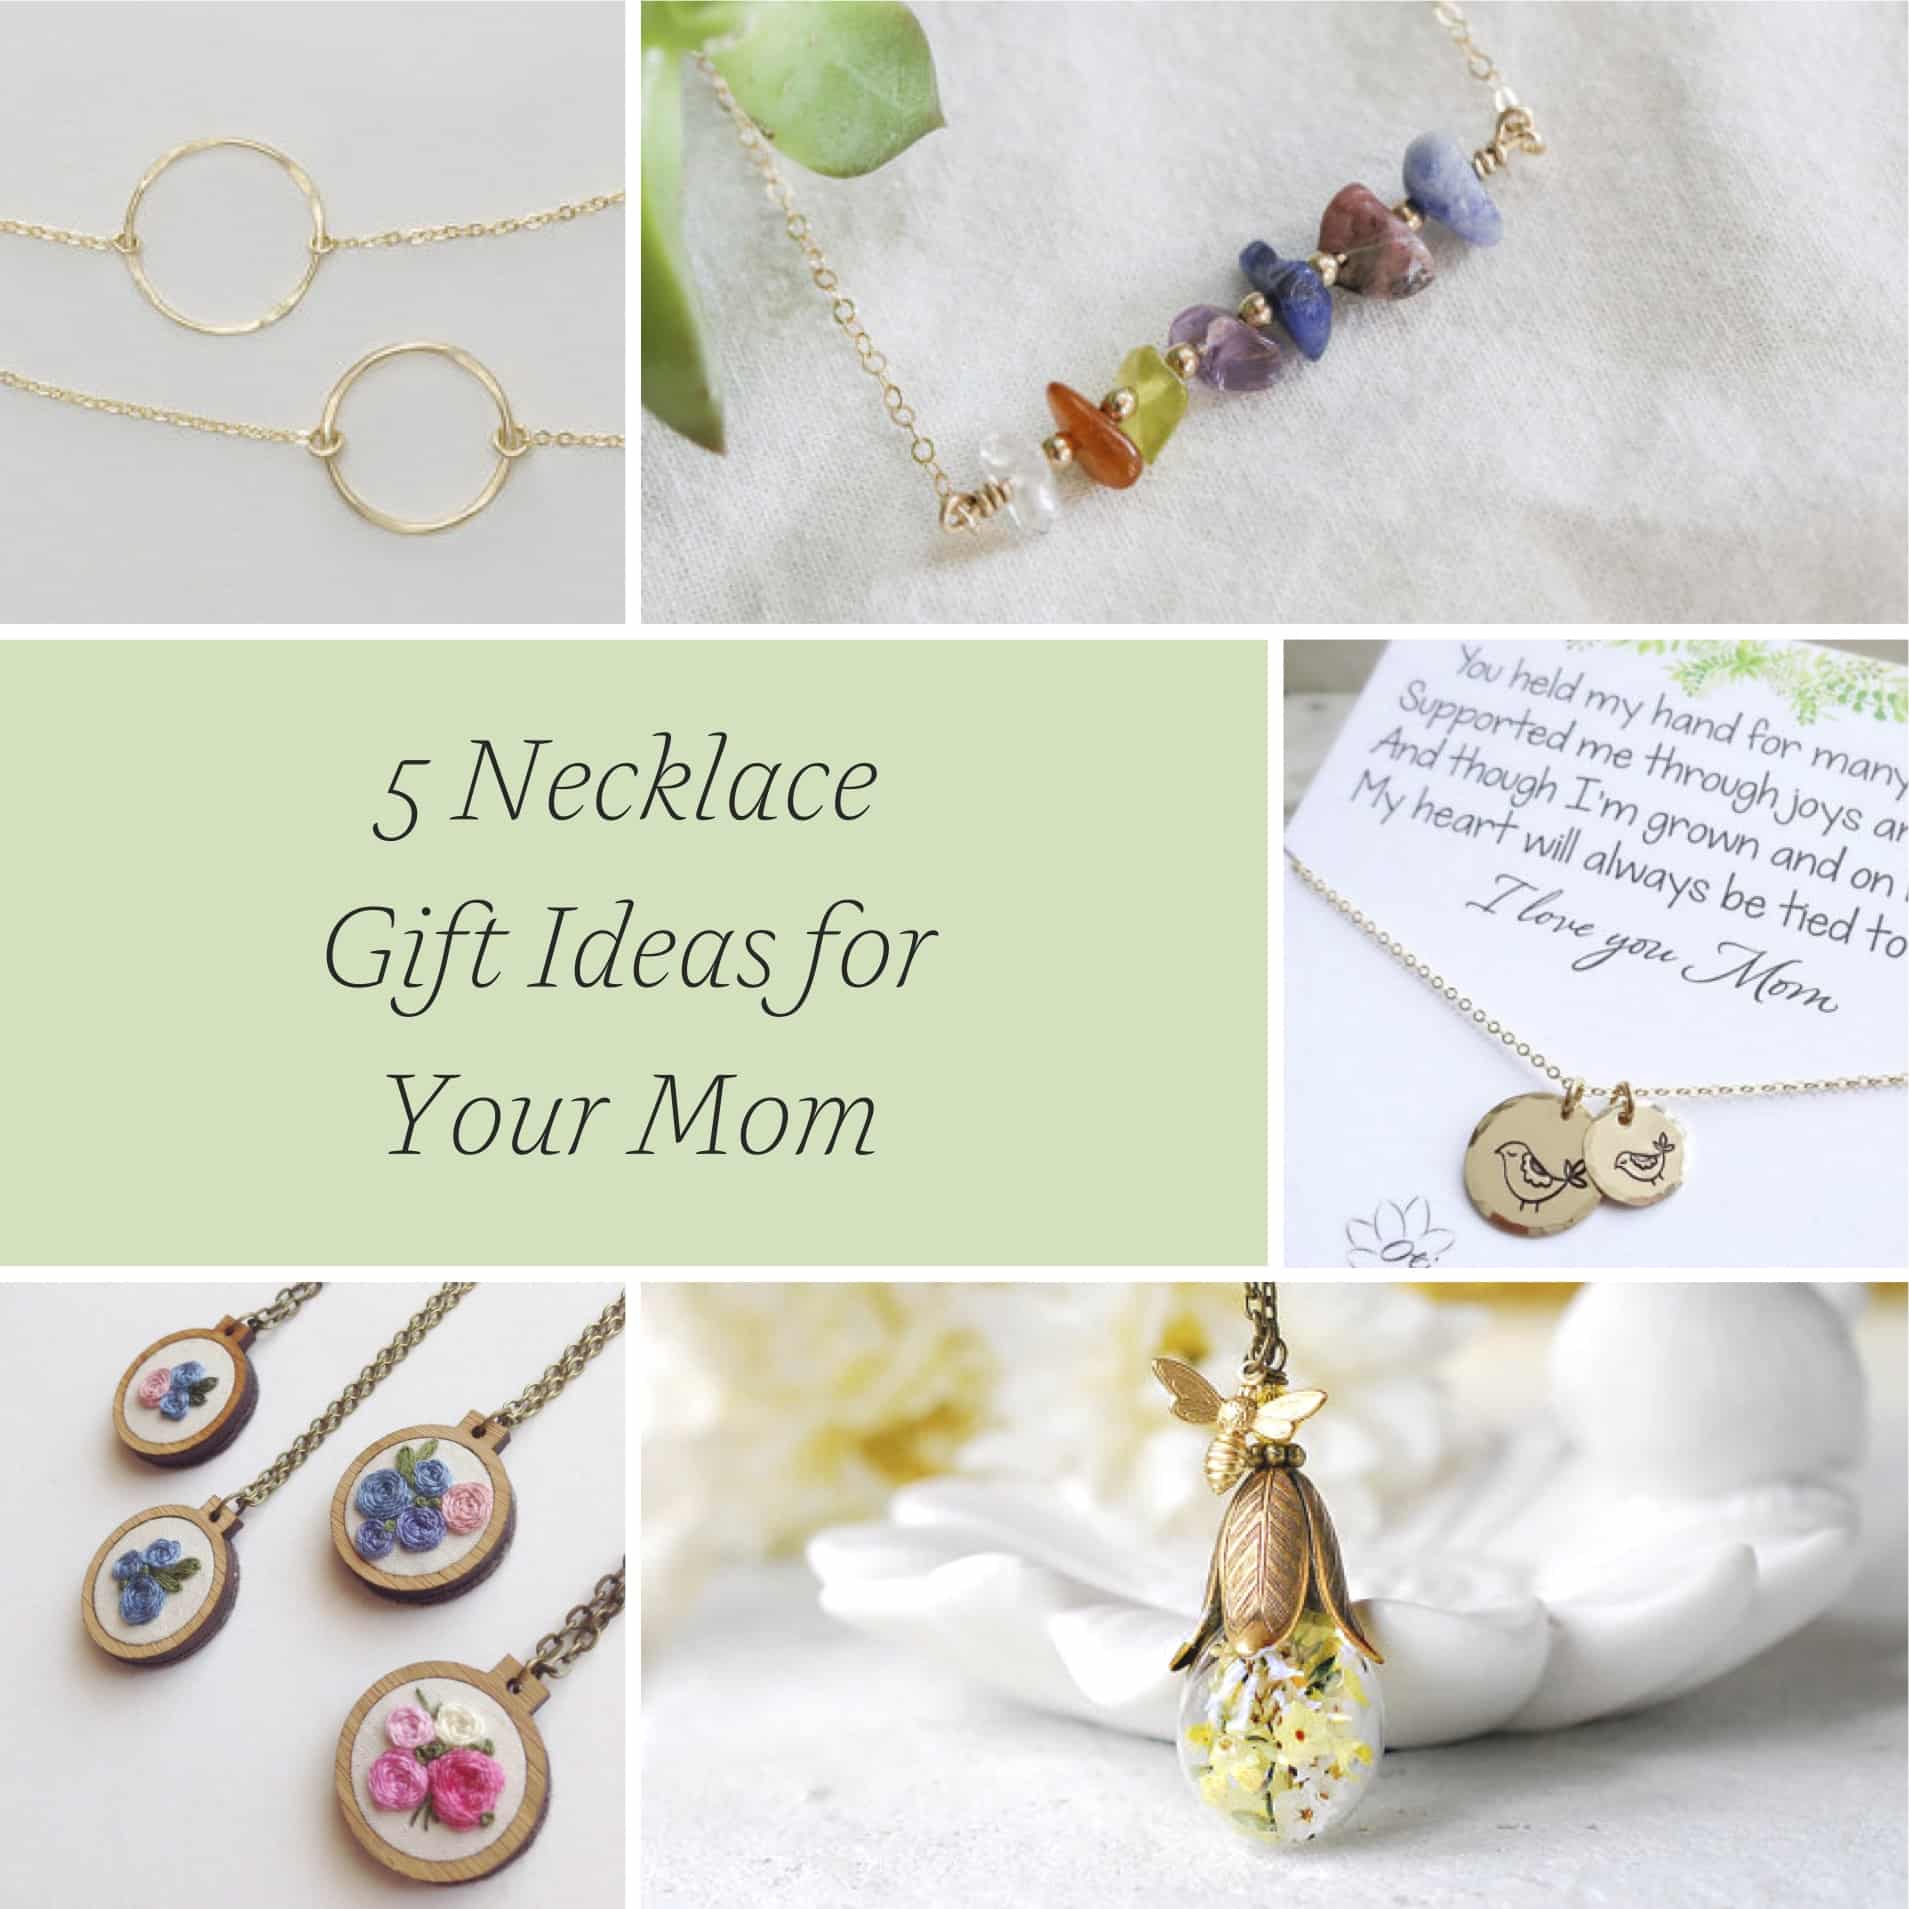 5 Necklace Gift Ideas for Your Mom (or His) » Hill City Bride